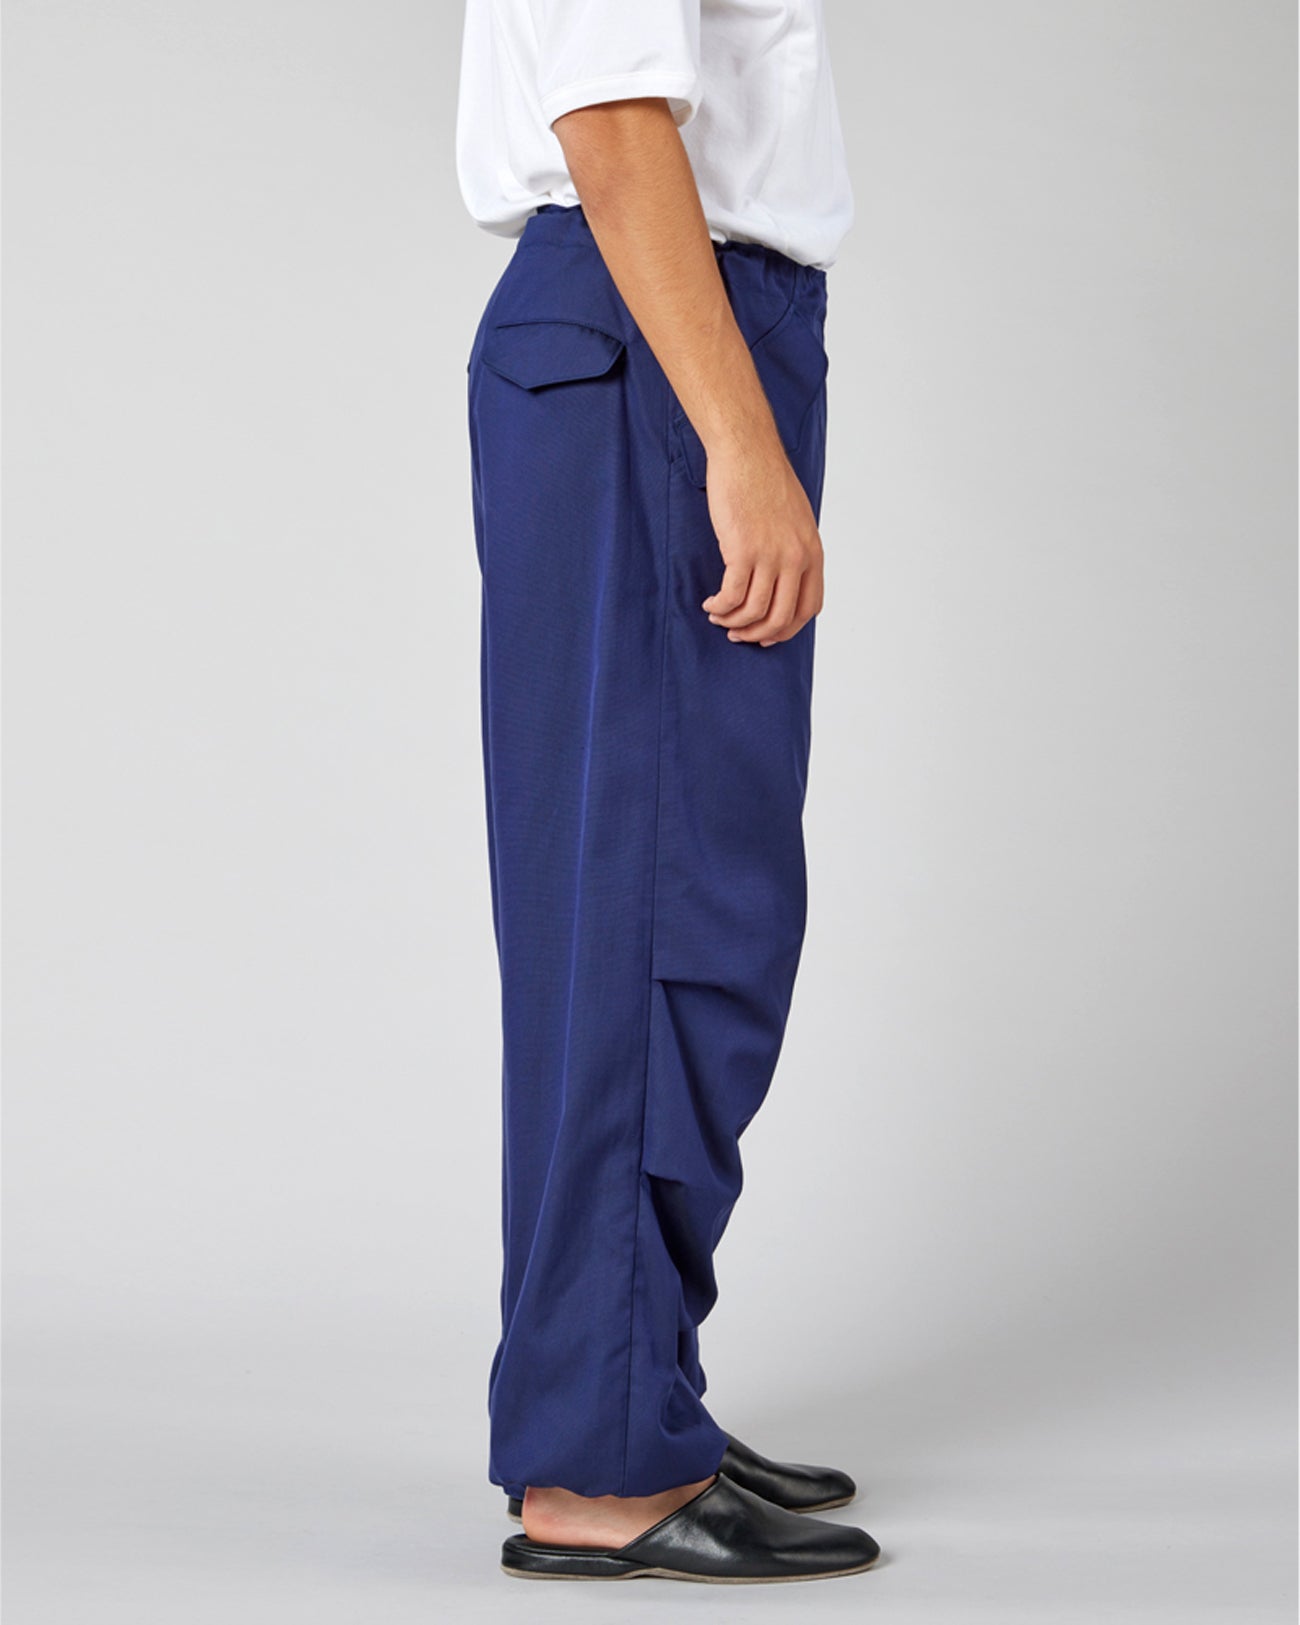 Finx OX New M65 Trousers - navy – FAB4 ONLINE STORE